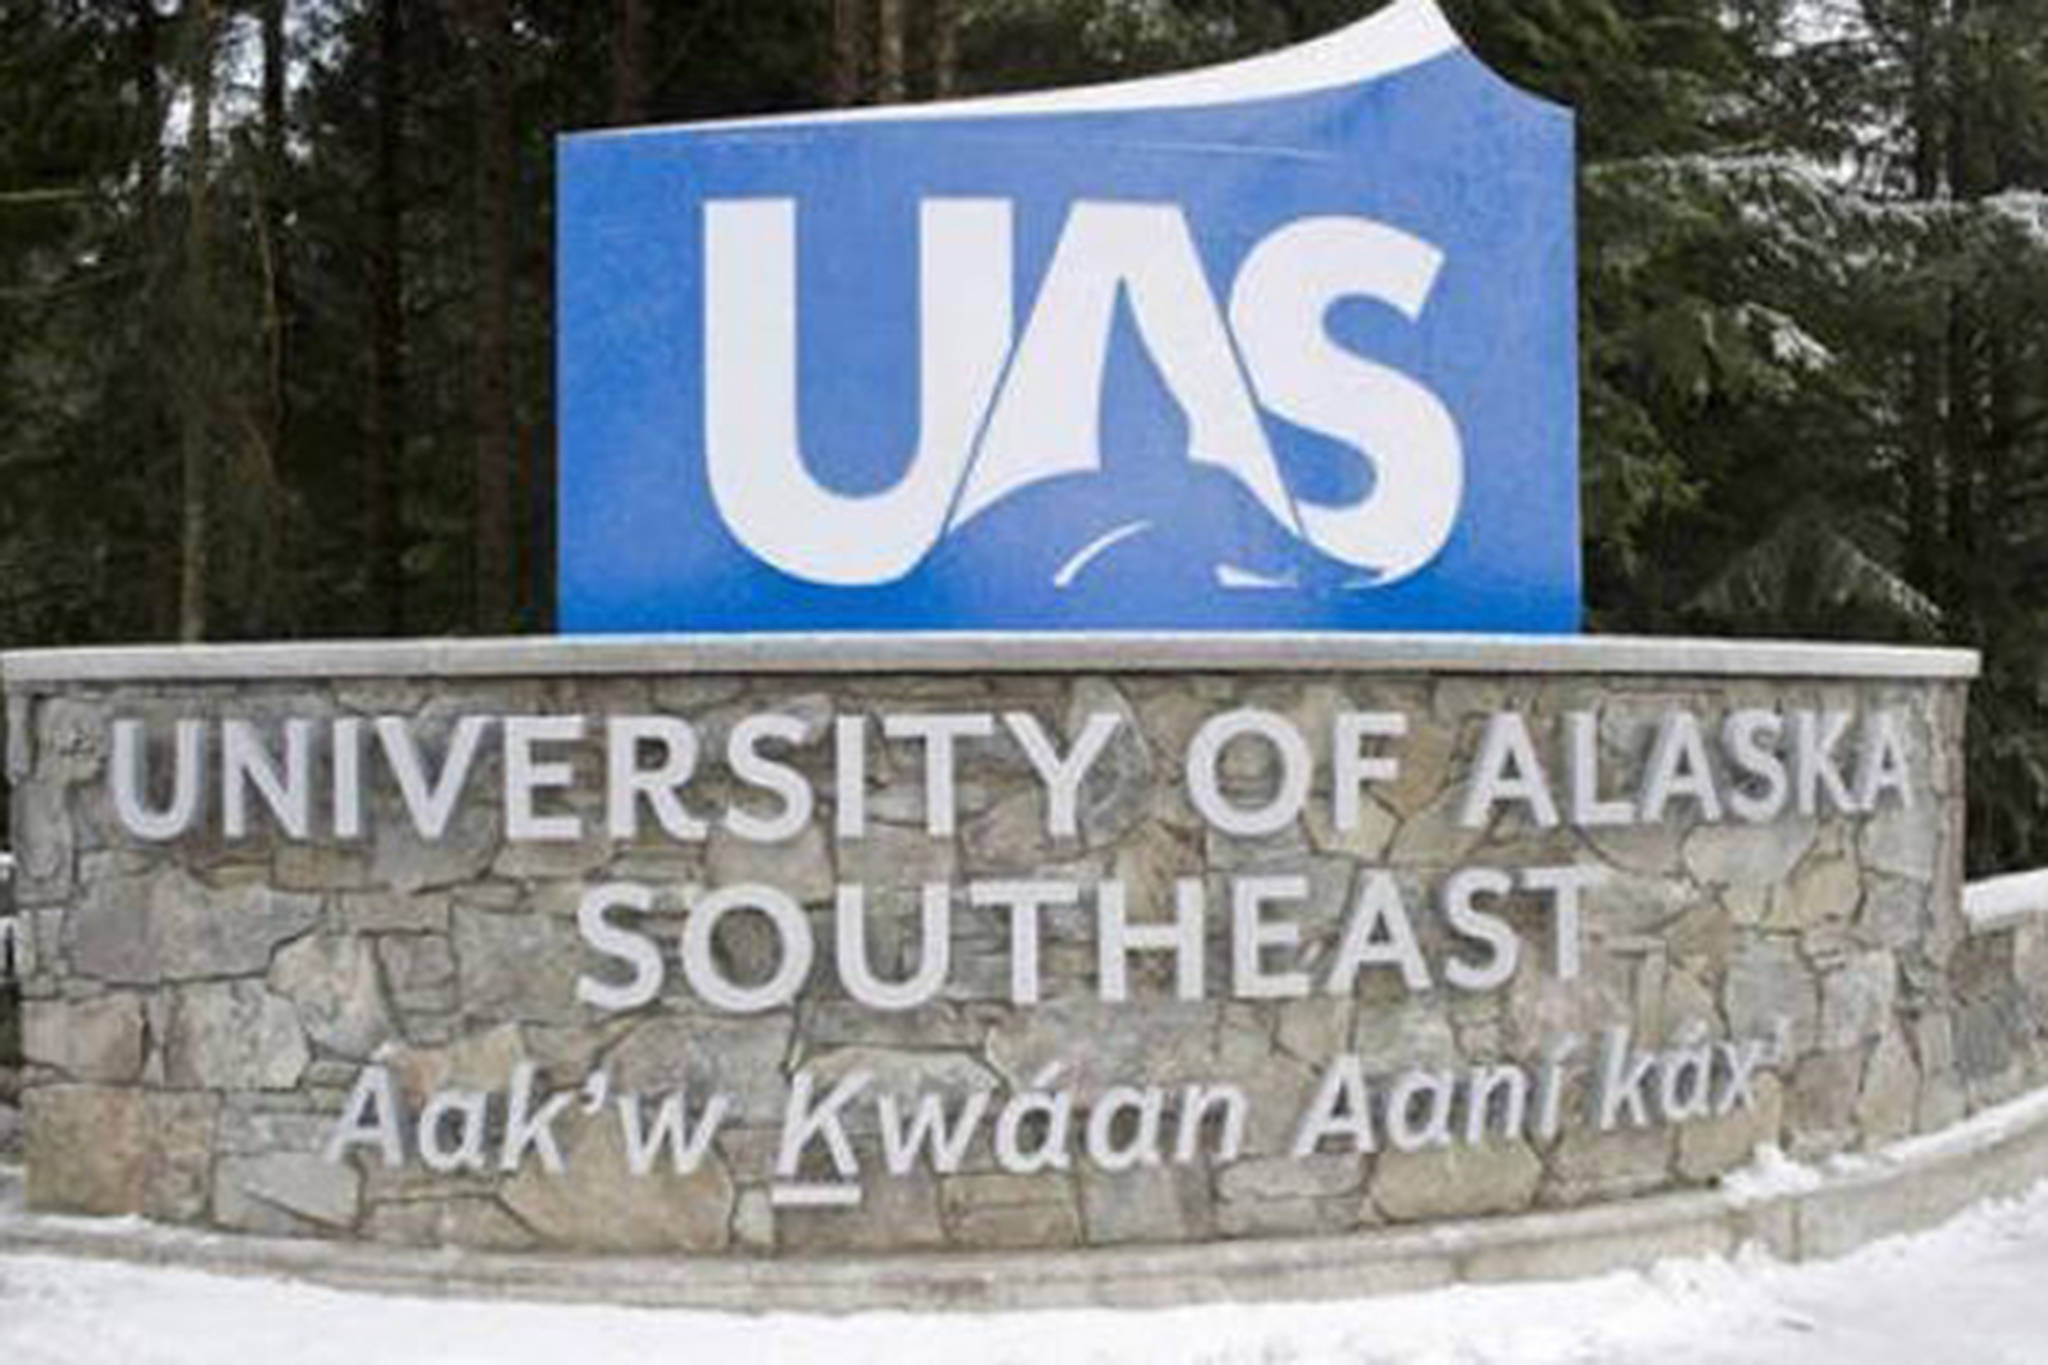 The front sign of University of Alaska Southeast is pictured in this file photo. (Juneau Empire File)